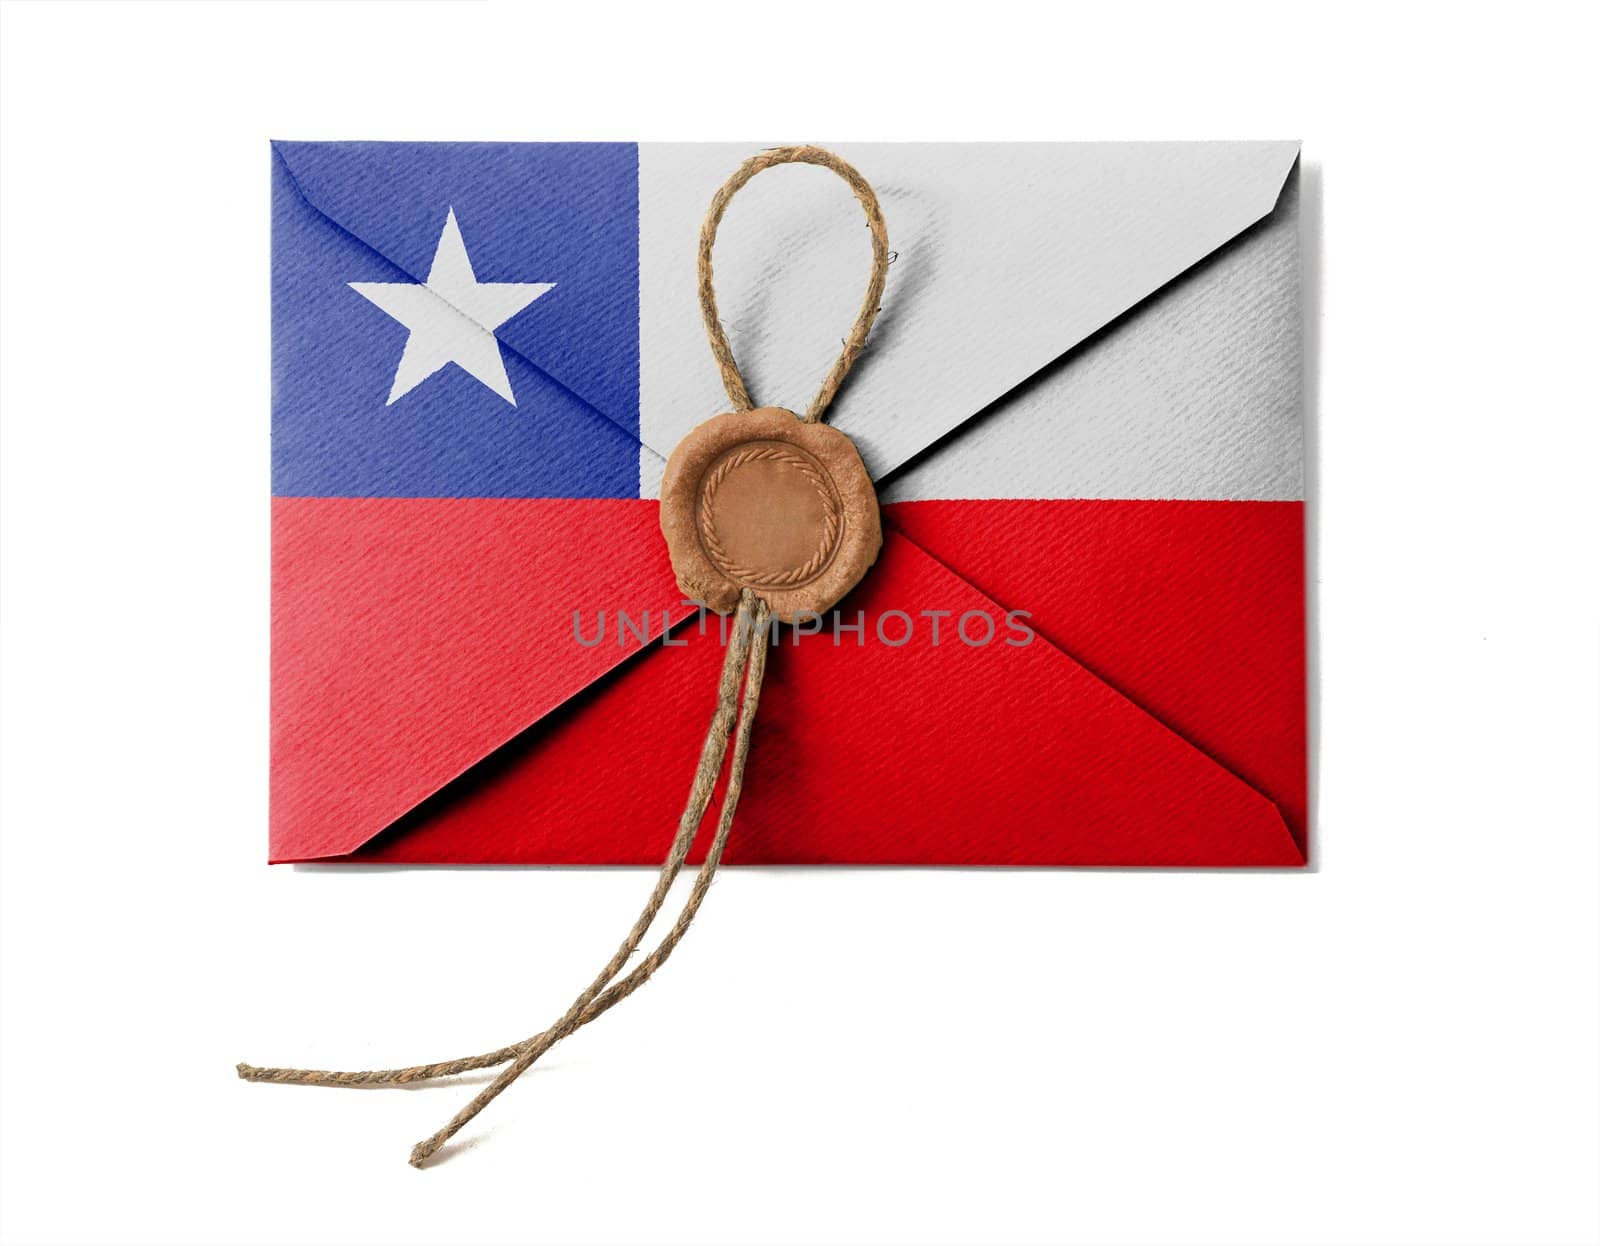 The Chile flag on the mail envelope. Isolated on white.